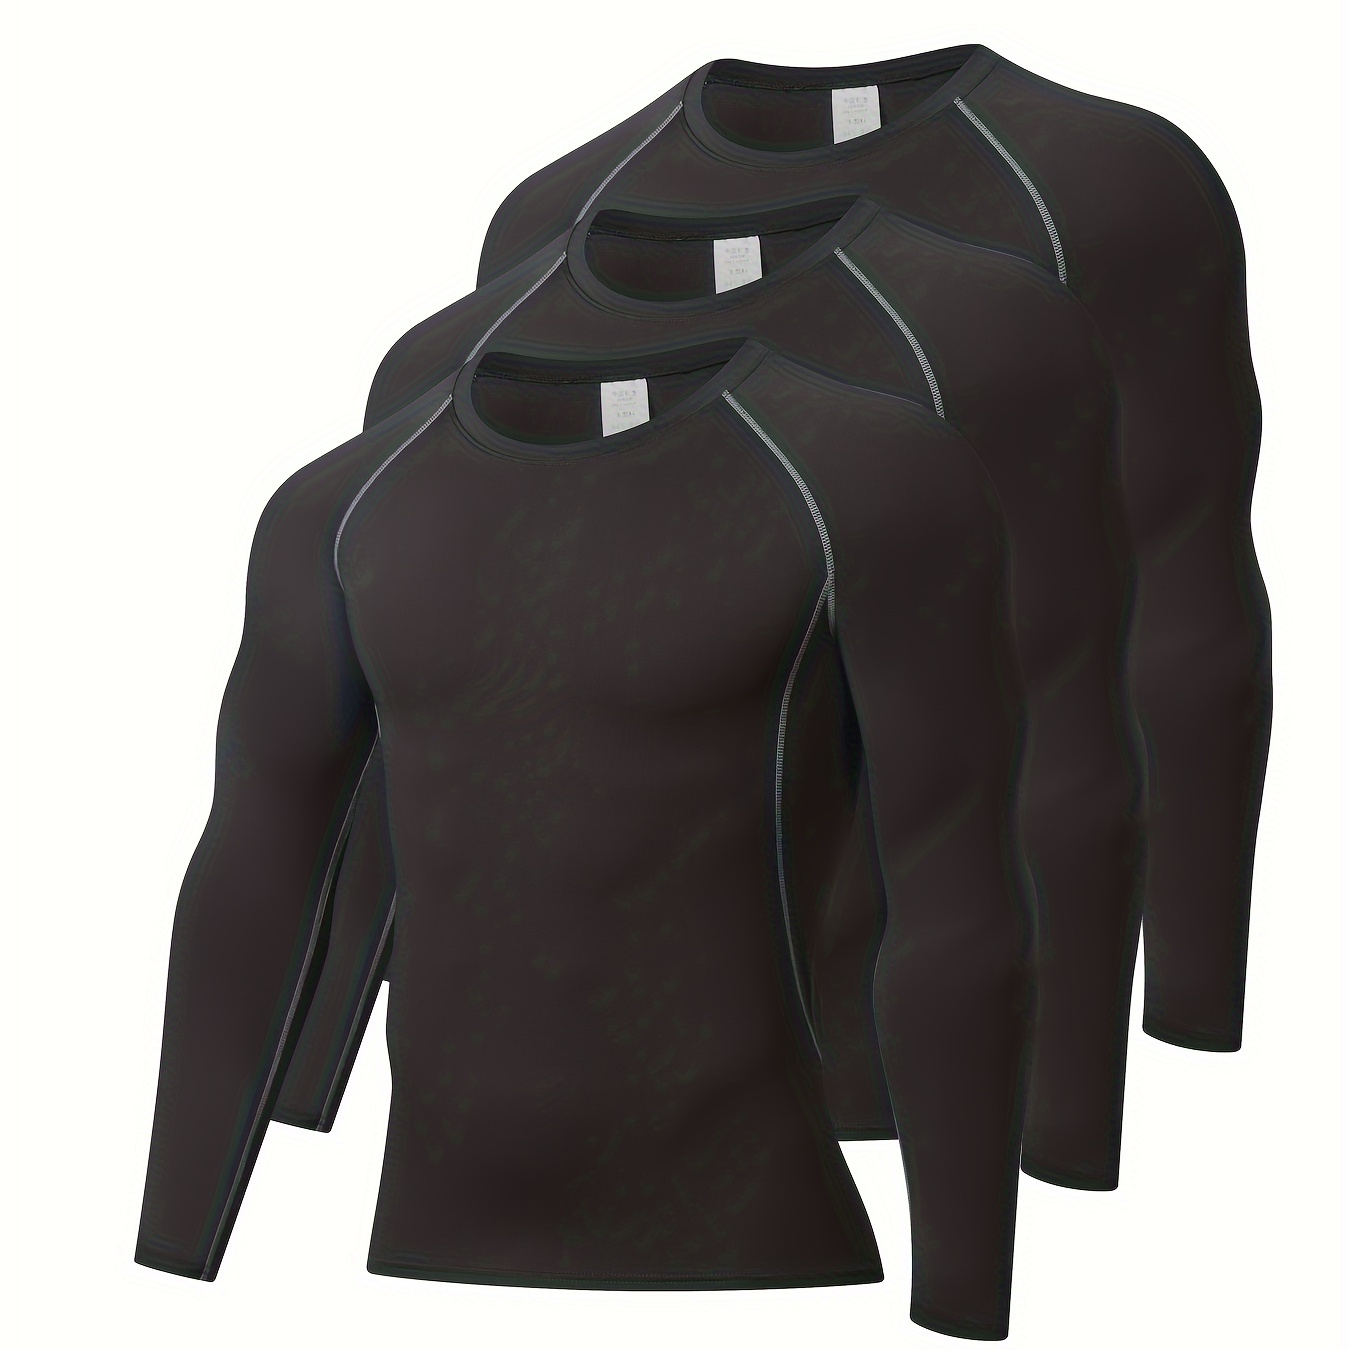 

3pcs Compression Shirts, Men's Long Sleeve Athletic Moisture Wicking Round Neck Baselayer, Sports Workout